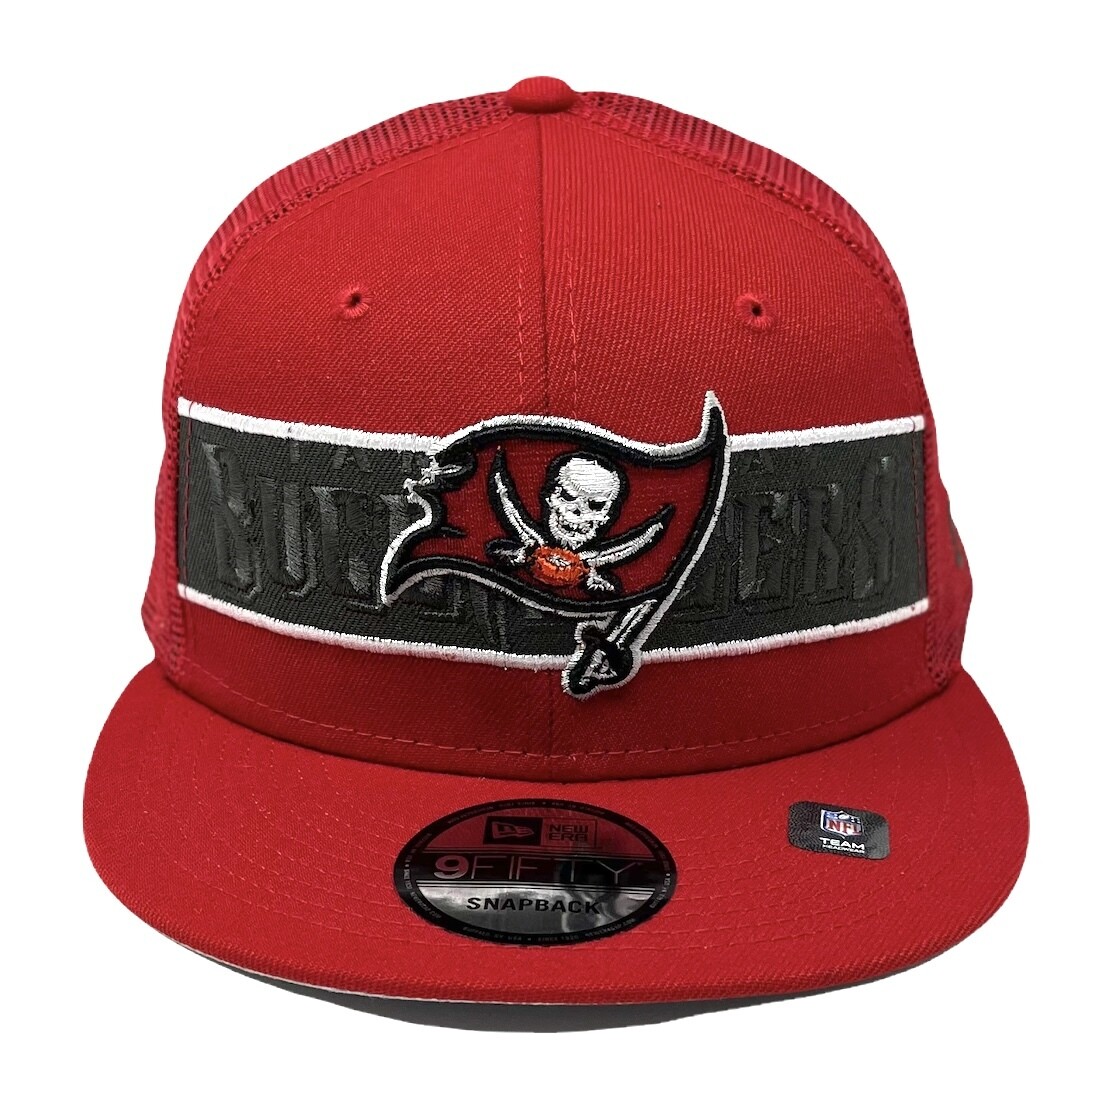 Tampa Bay Buccaneers Red New Era 9Fifty Snapback Hat